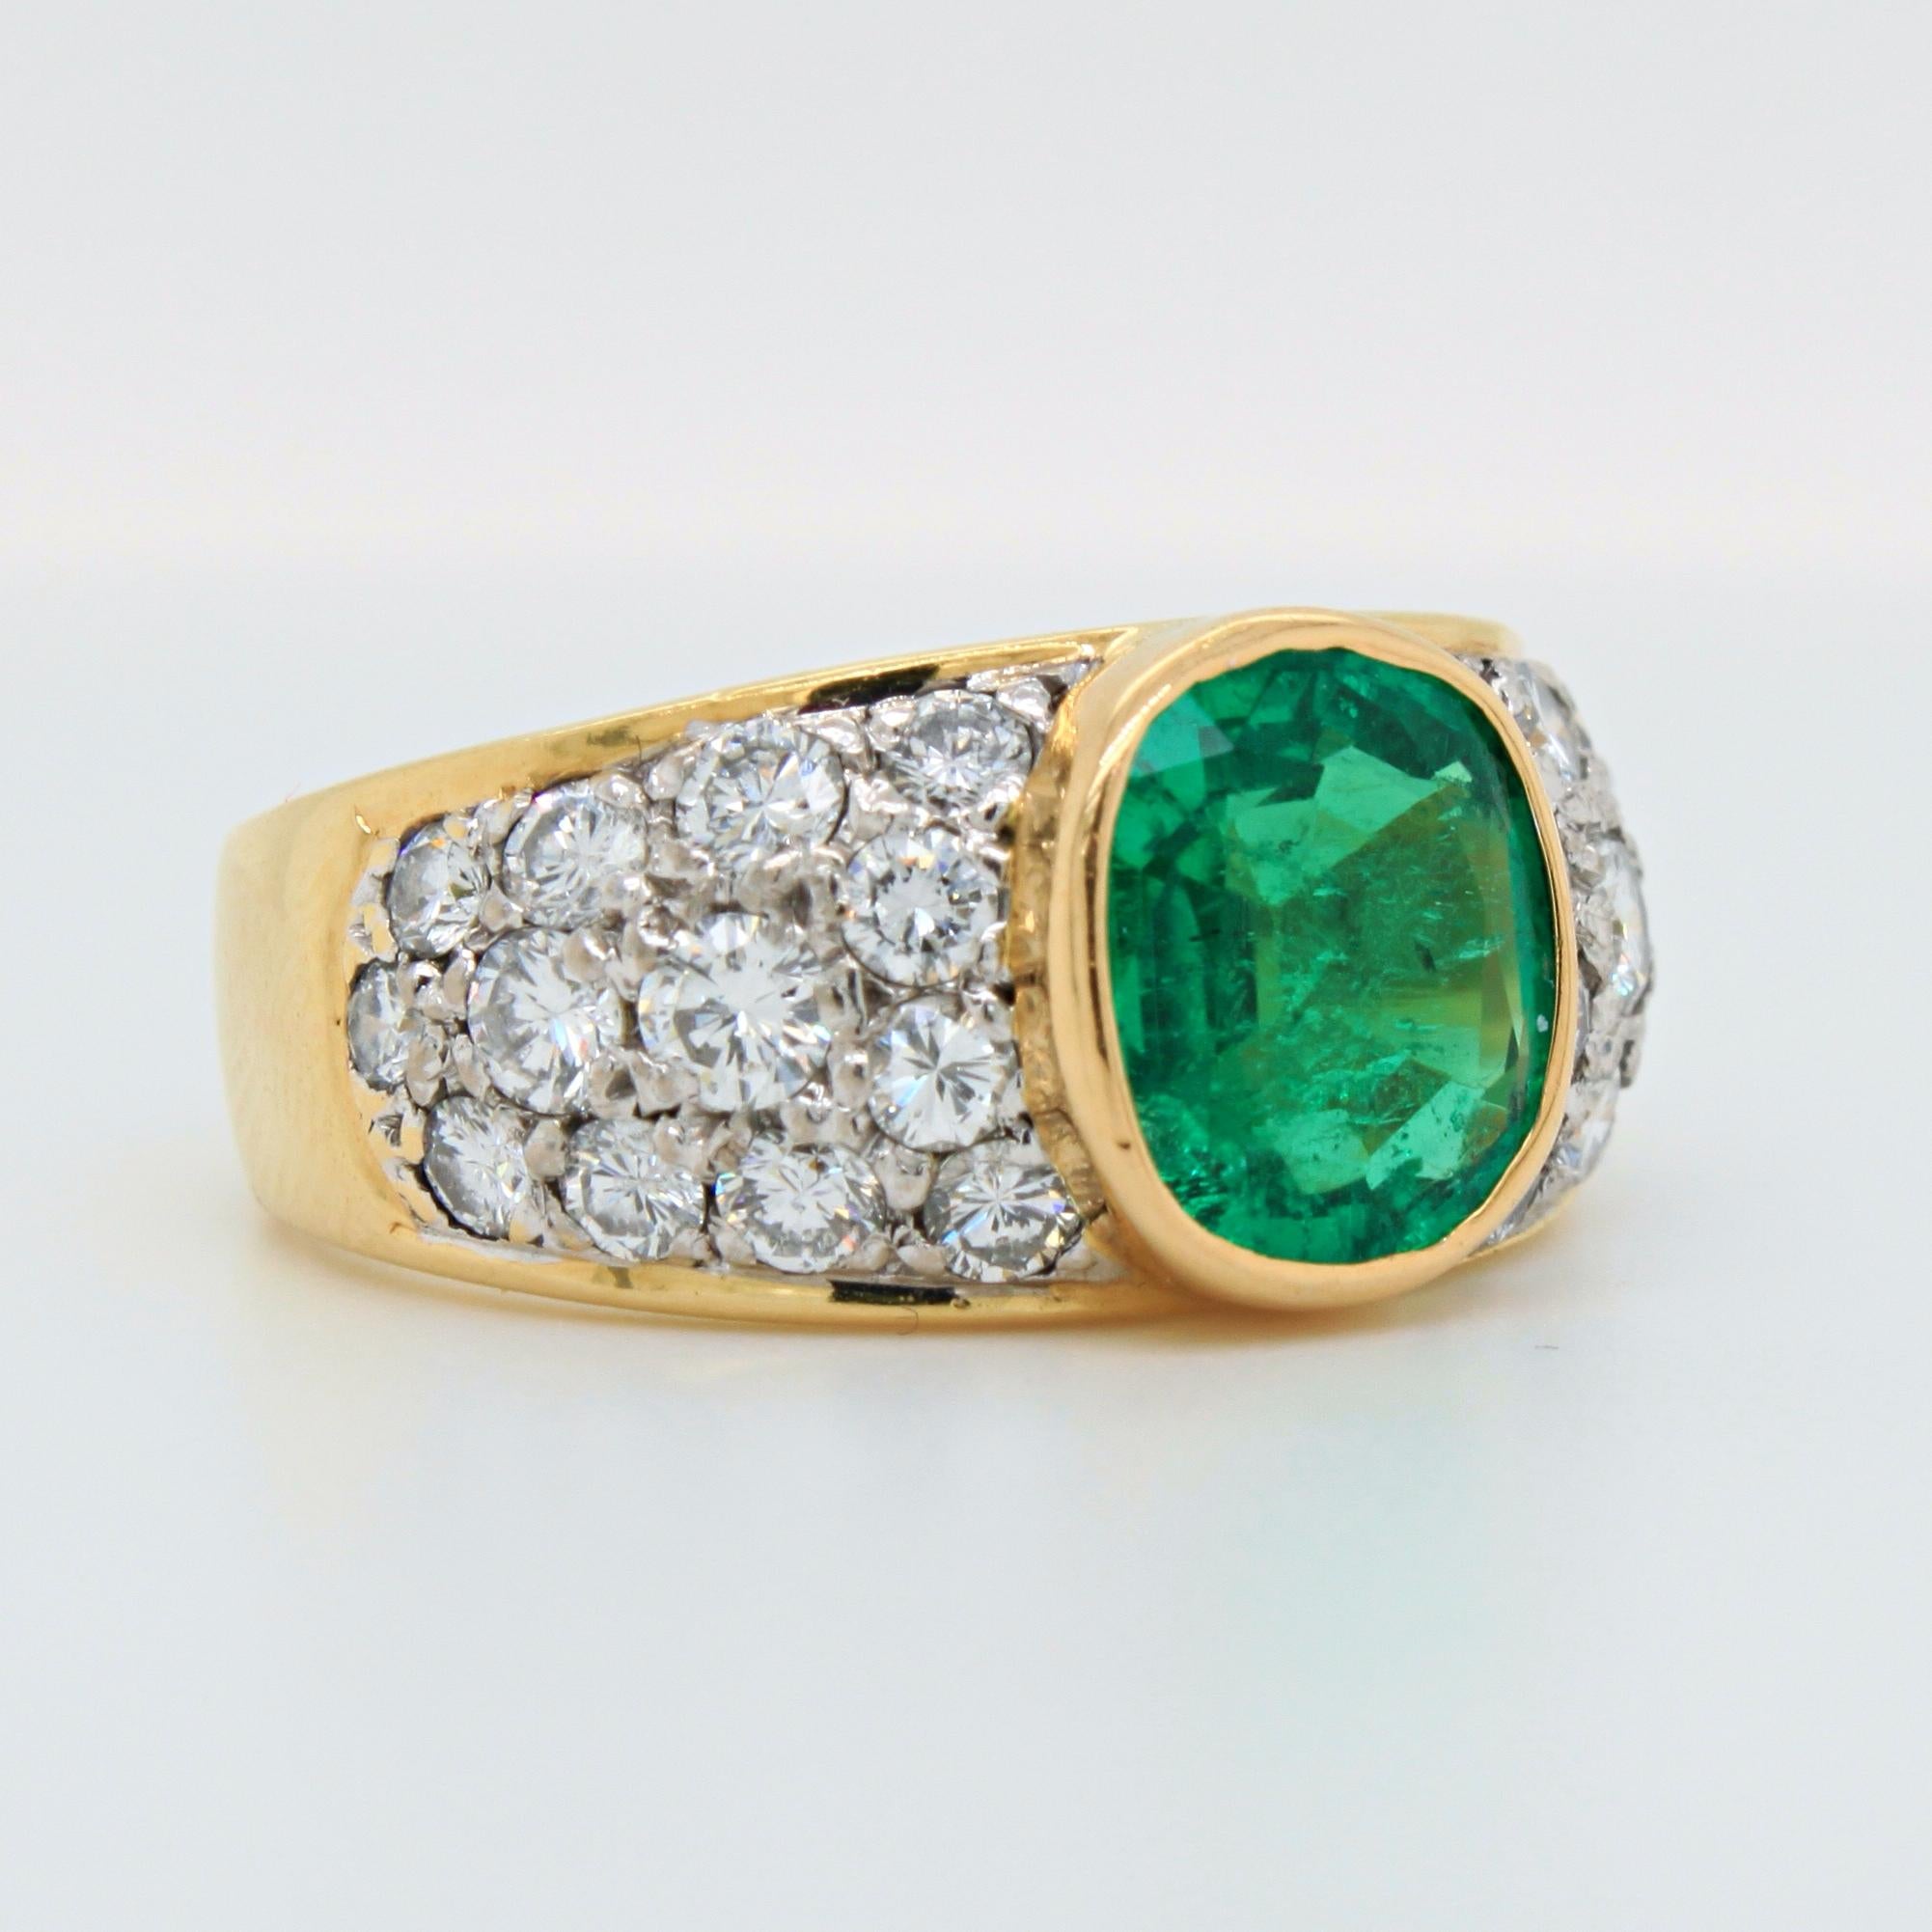 A Colombian emerald and diamond ring in 18k yellow gold. The flat emerald cushion has a strong crystal and beautiful deep green colour, with a lovely jardin adding to the allure of the gemstone. It weighs approximately 1.66 carats and is of